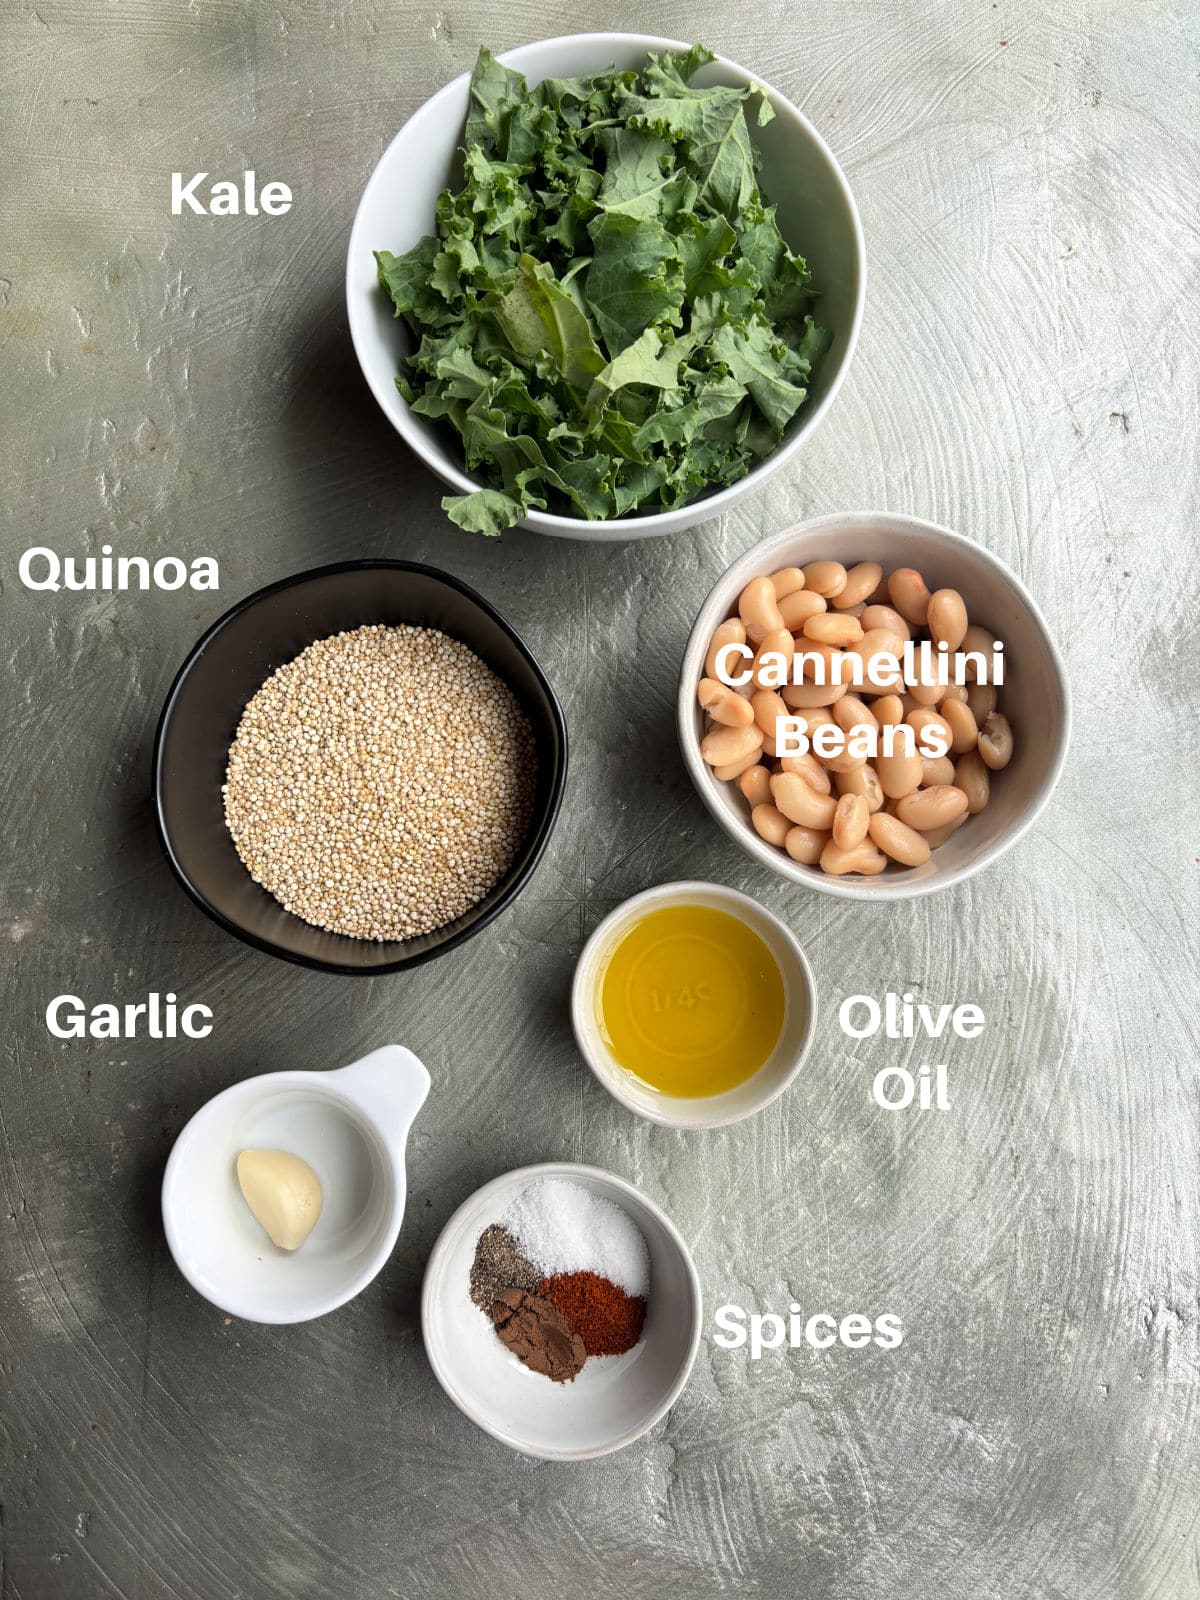 Quinoa soup ingredients labeled

